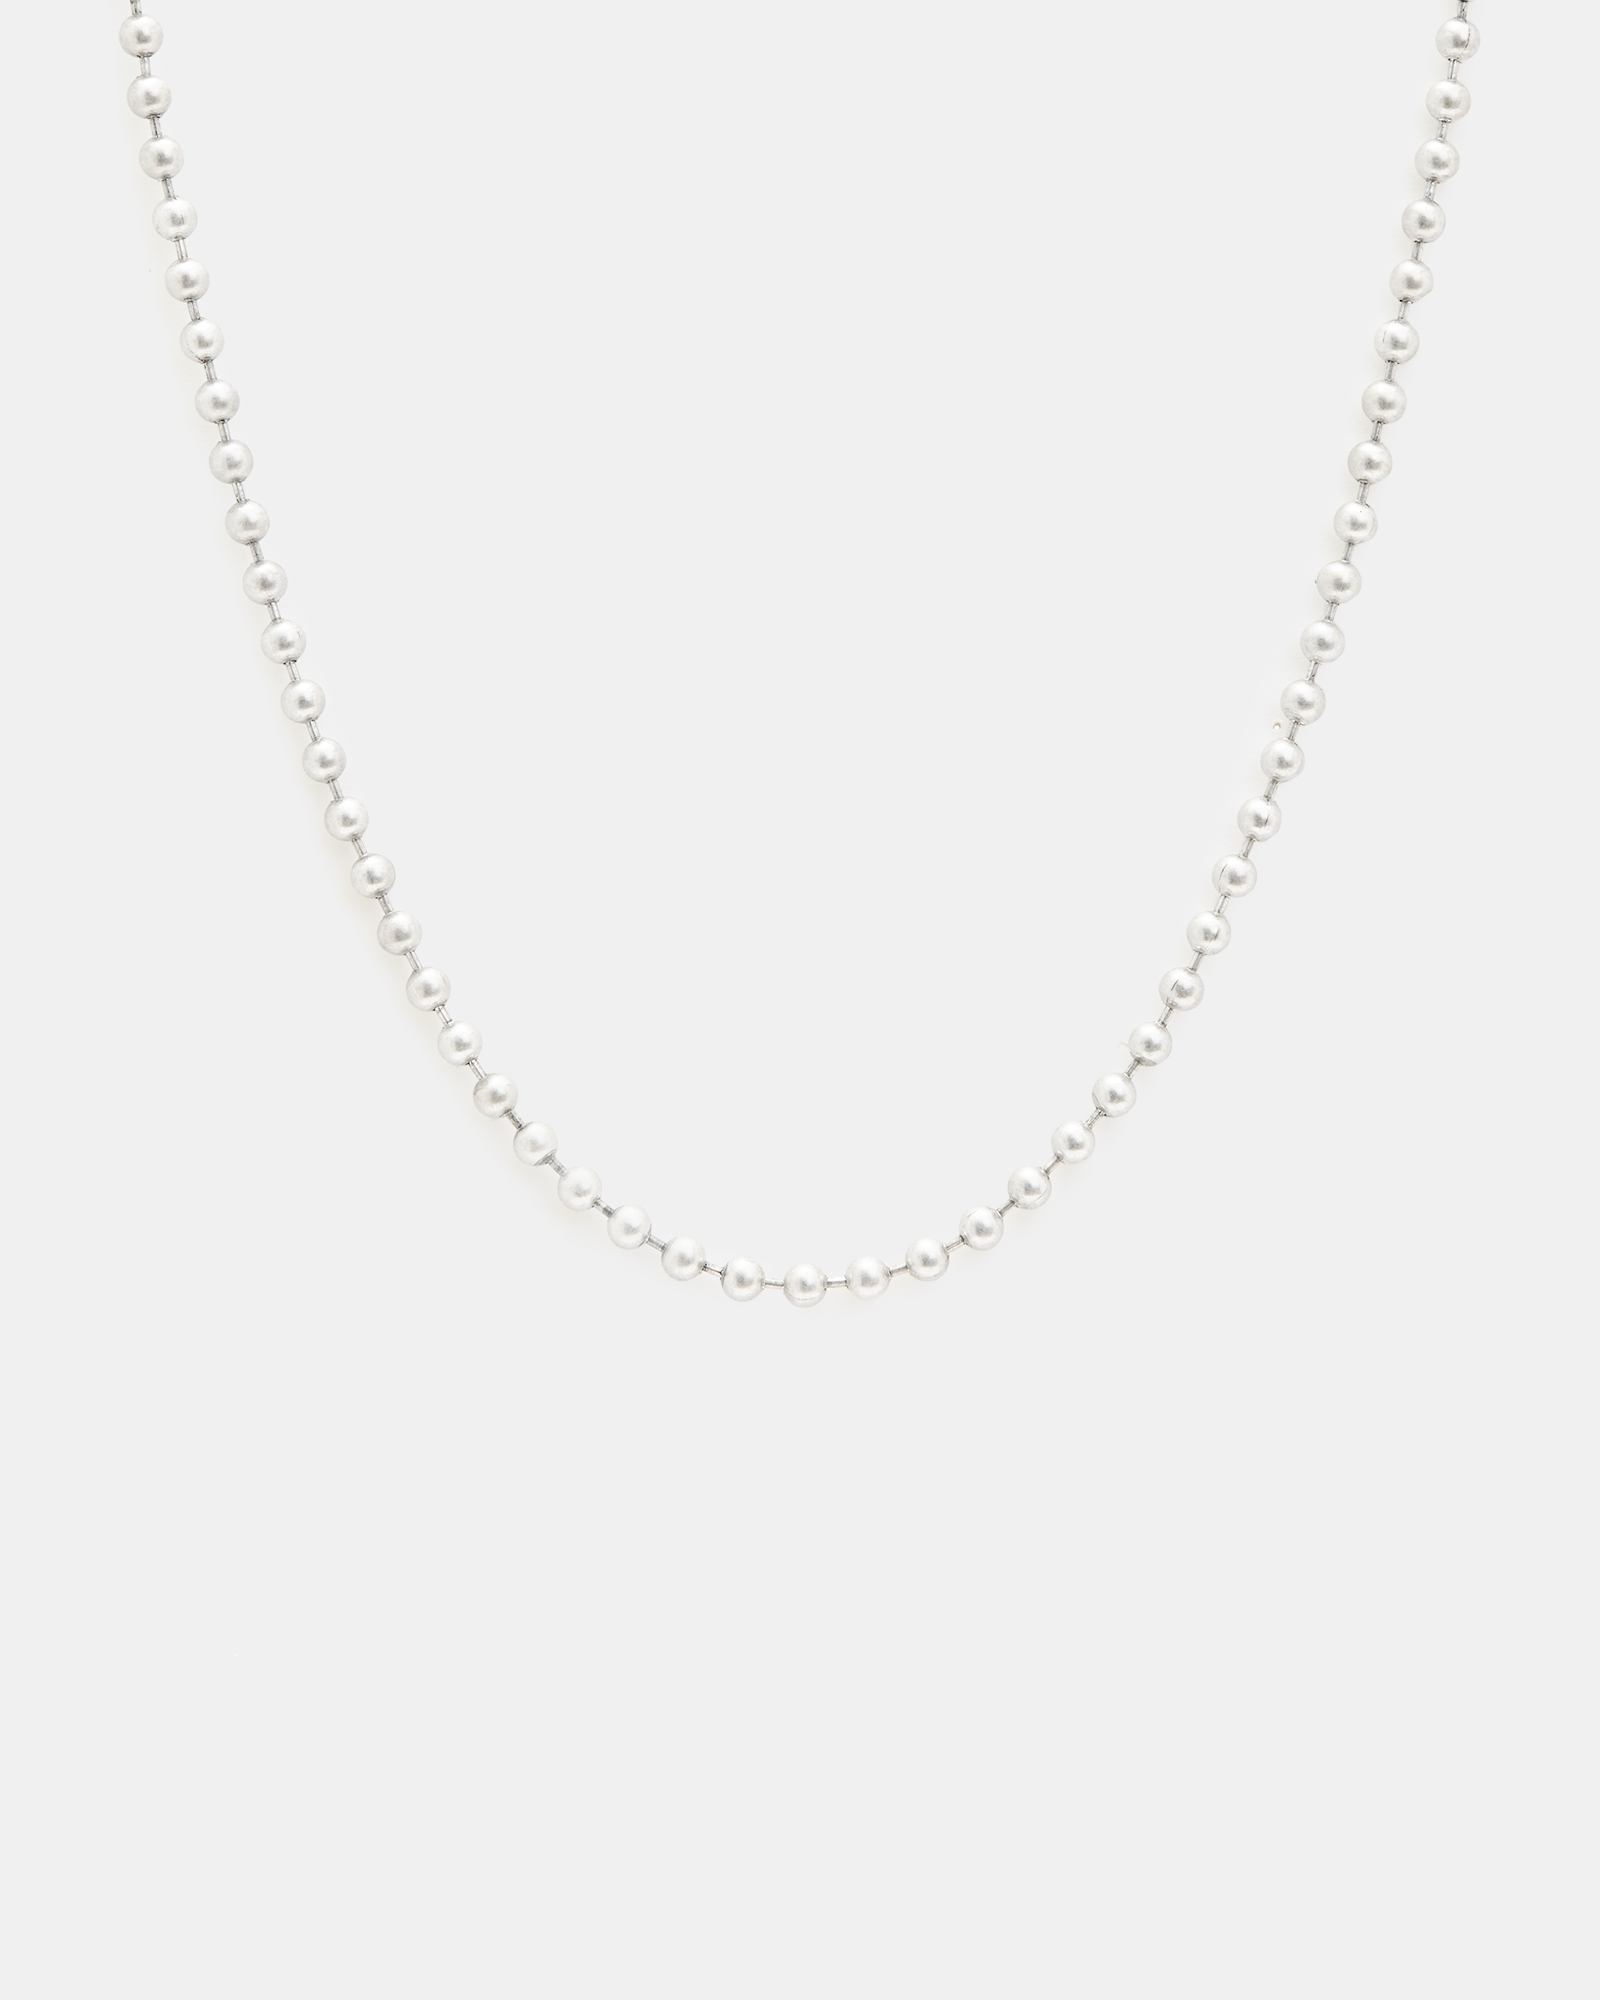 AllSaints Toby Ball Chain Necklace,, WARM SILVER, Size: One Size